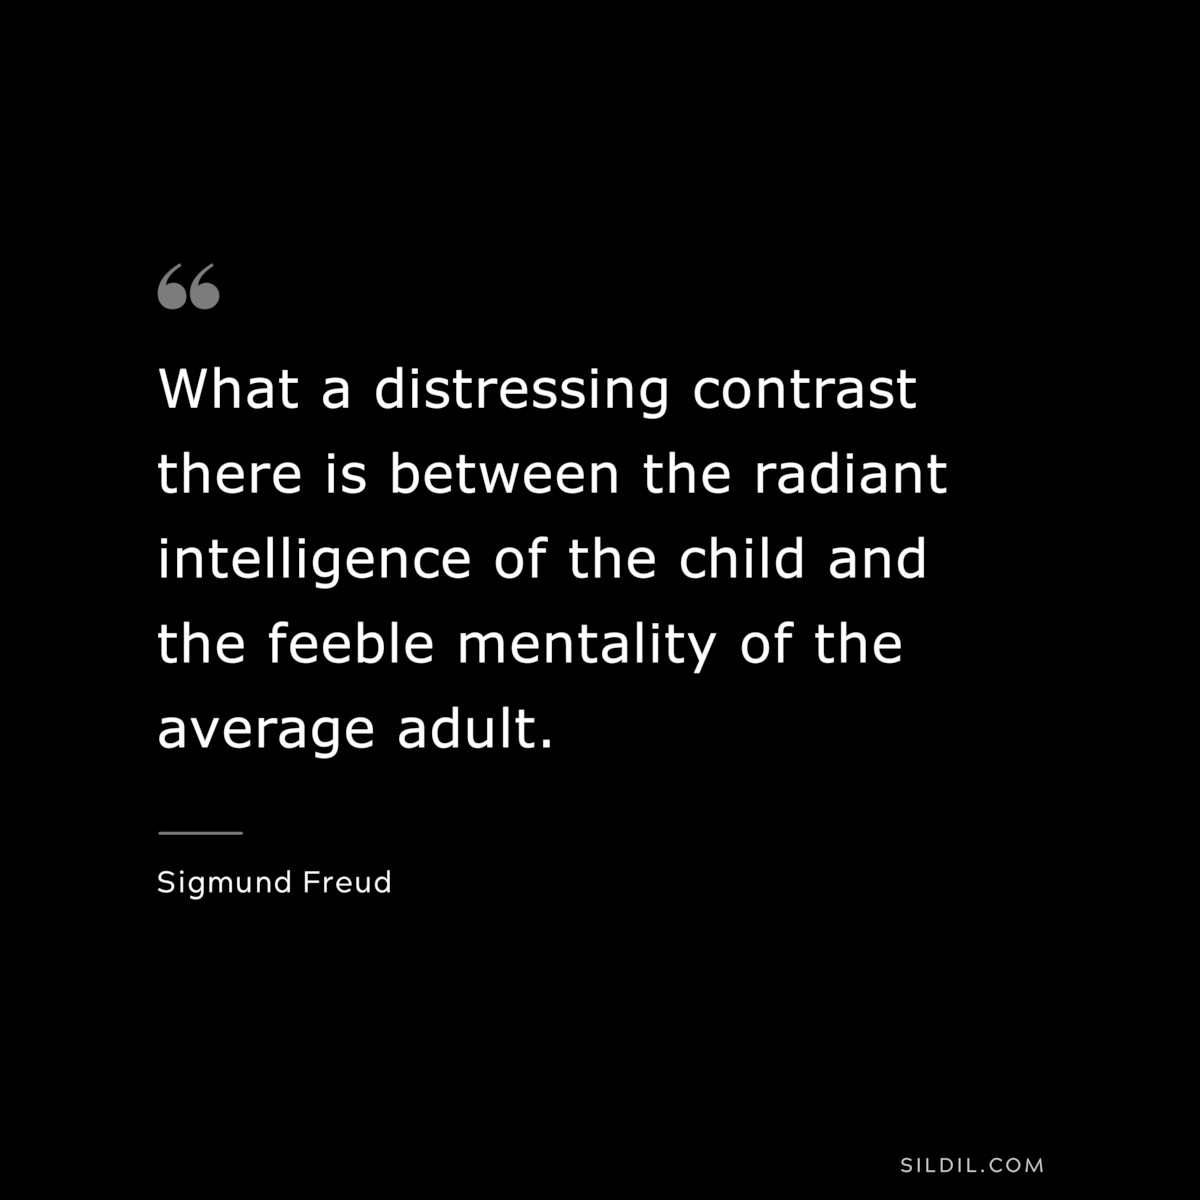 What a distressing contrast there is between the radiant intelligence of the child and the feeble mentality of the average adult. ― Sigmund Frued